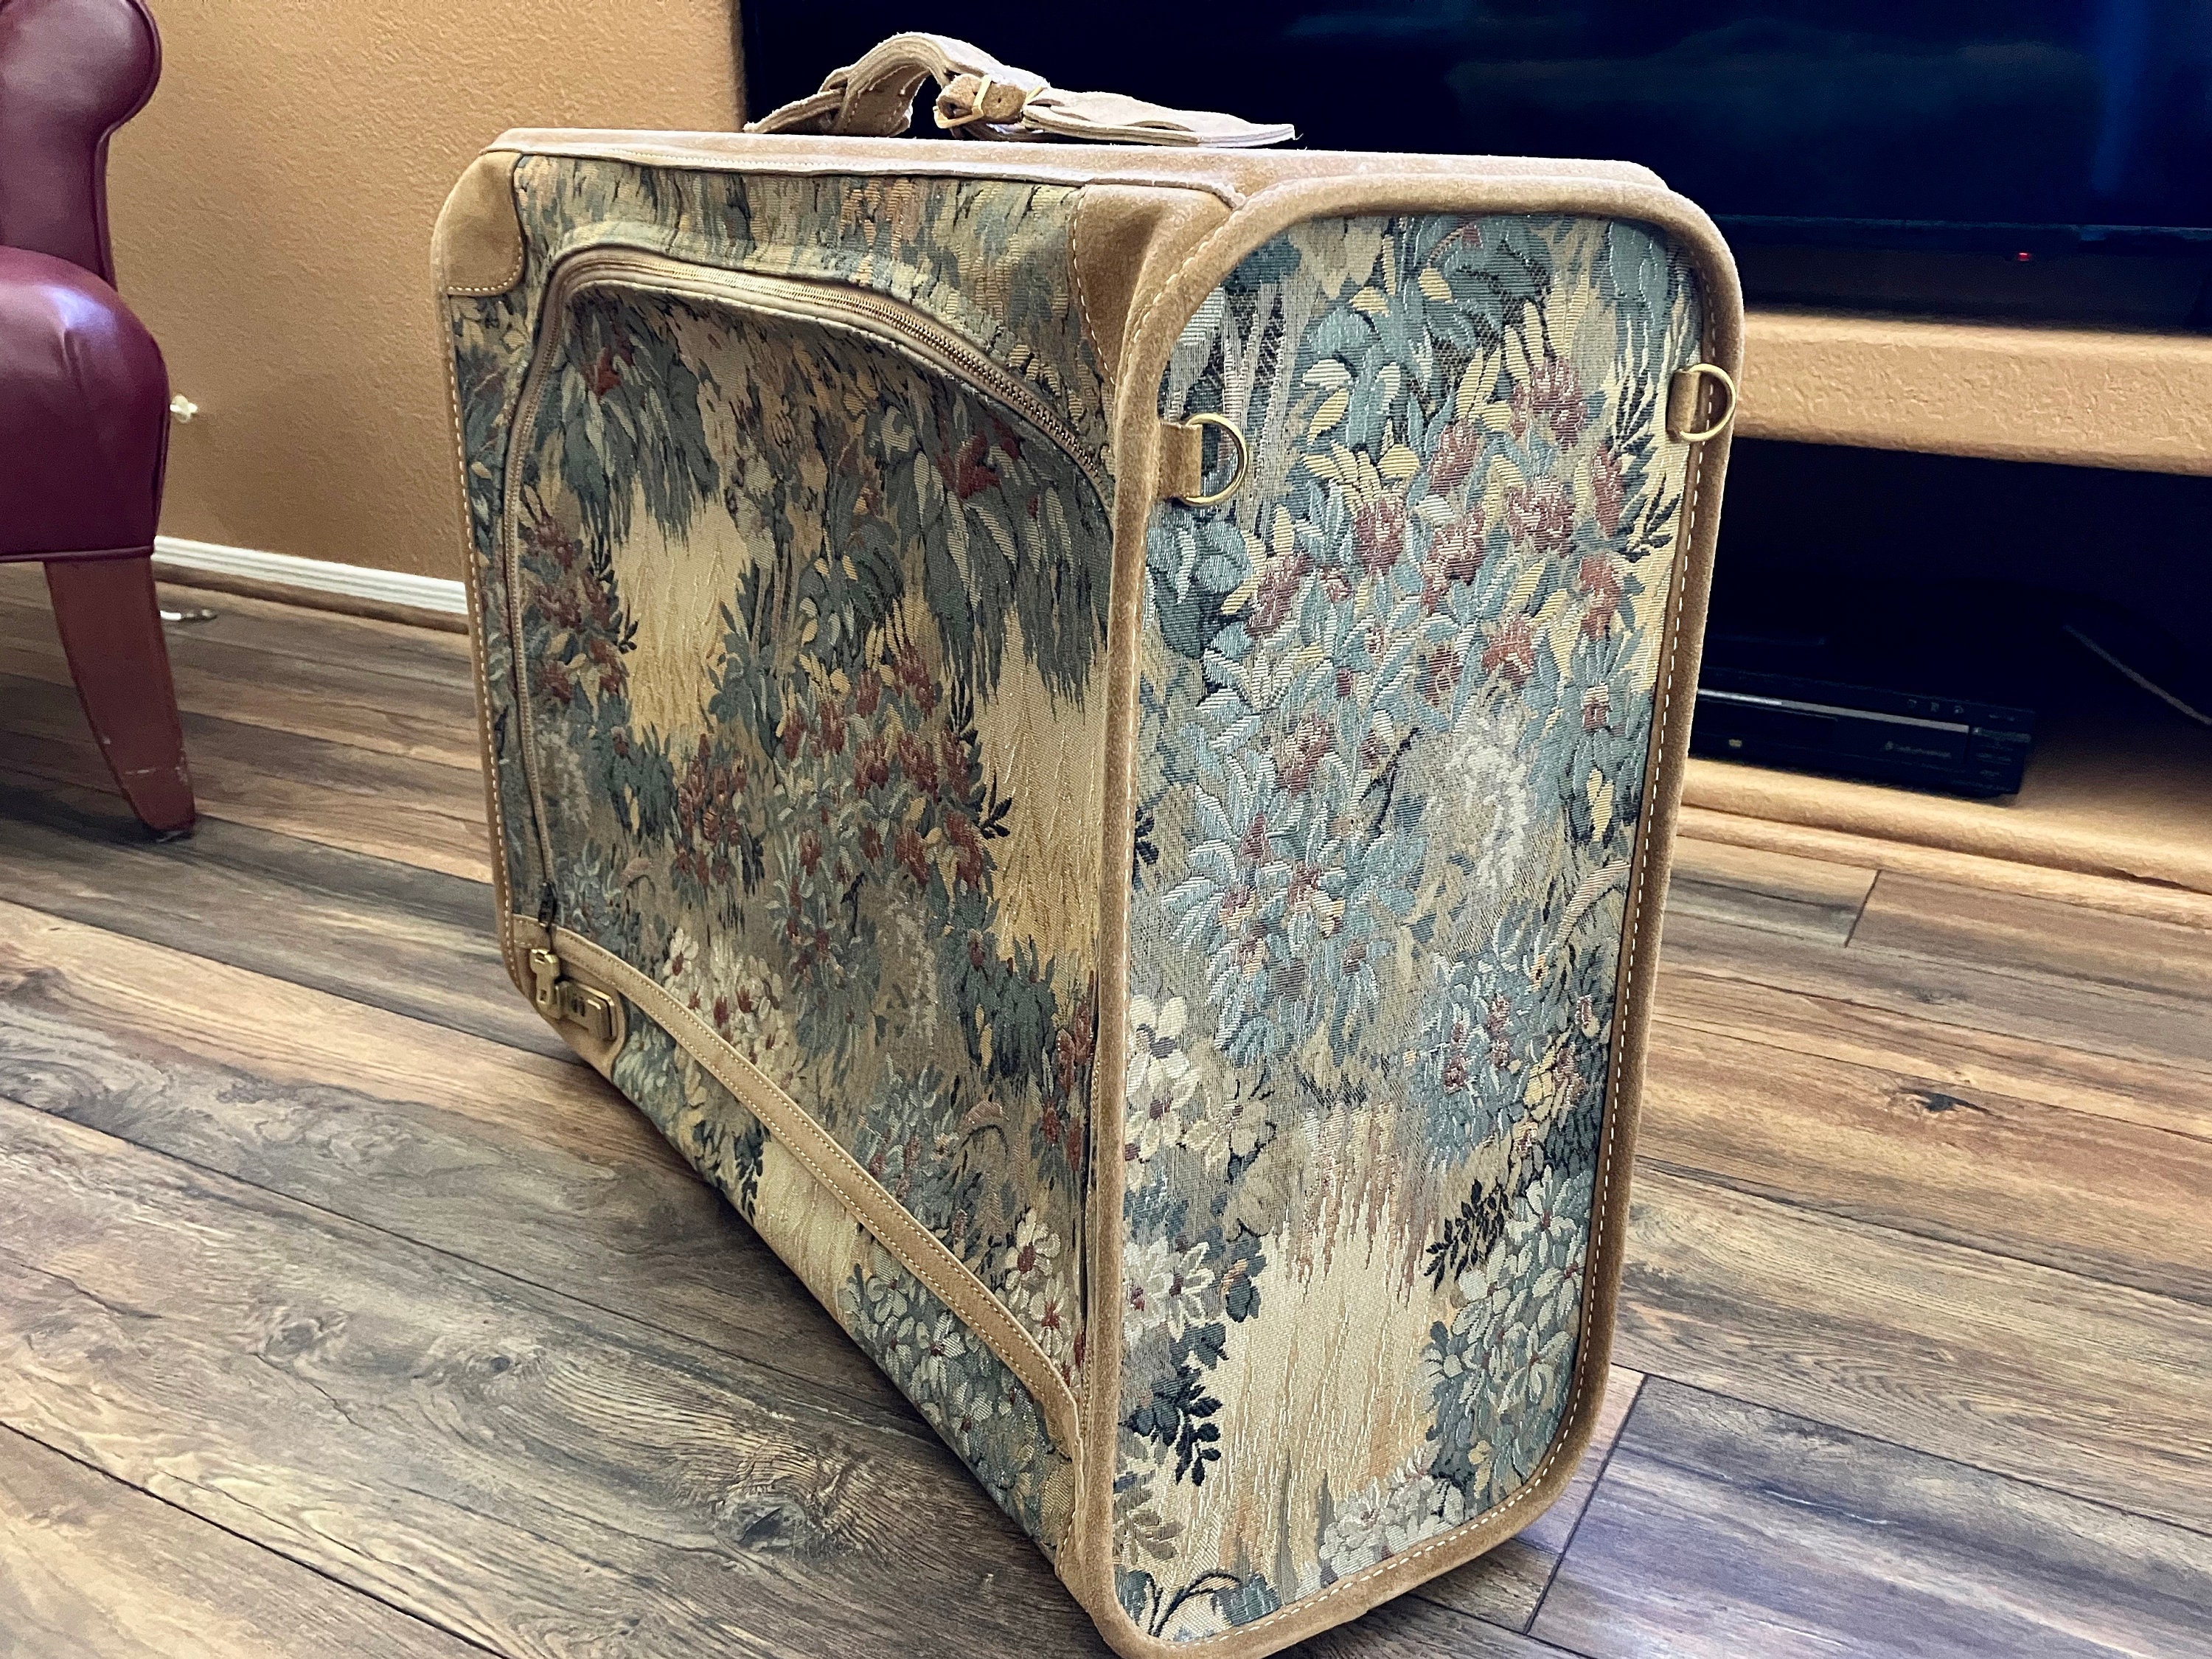 Vintage FRENCH Luggage Paradise Floral Tapestry Cosmetic Train Case Purse  Bag